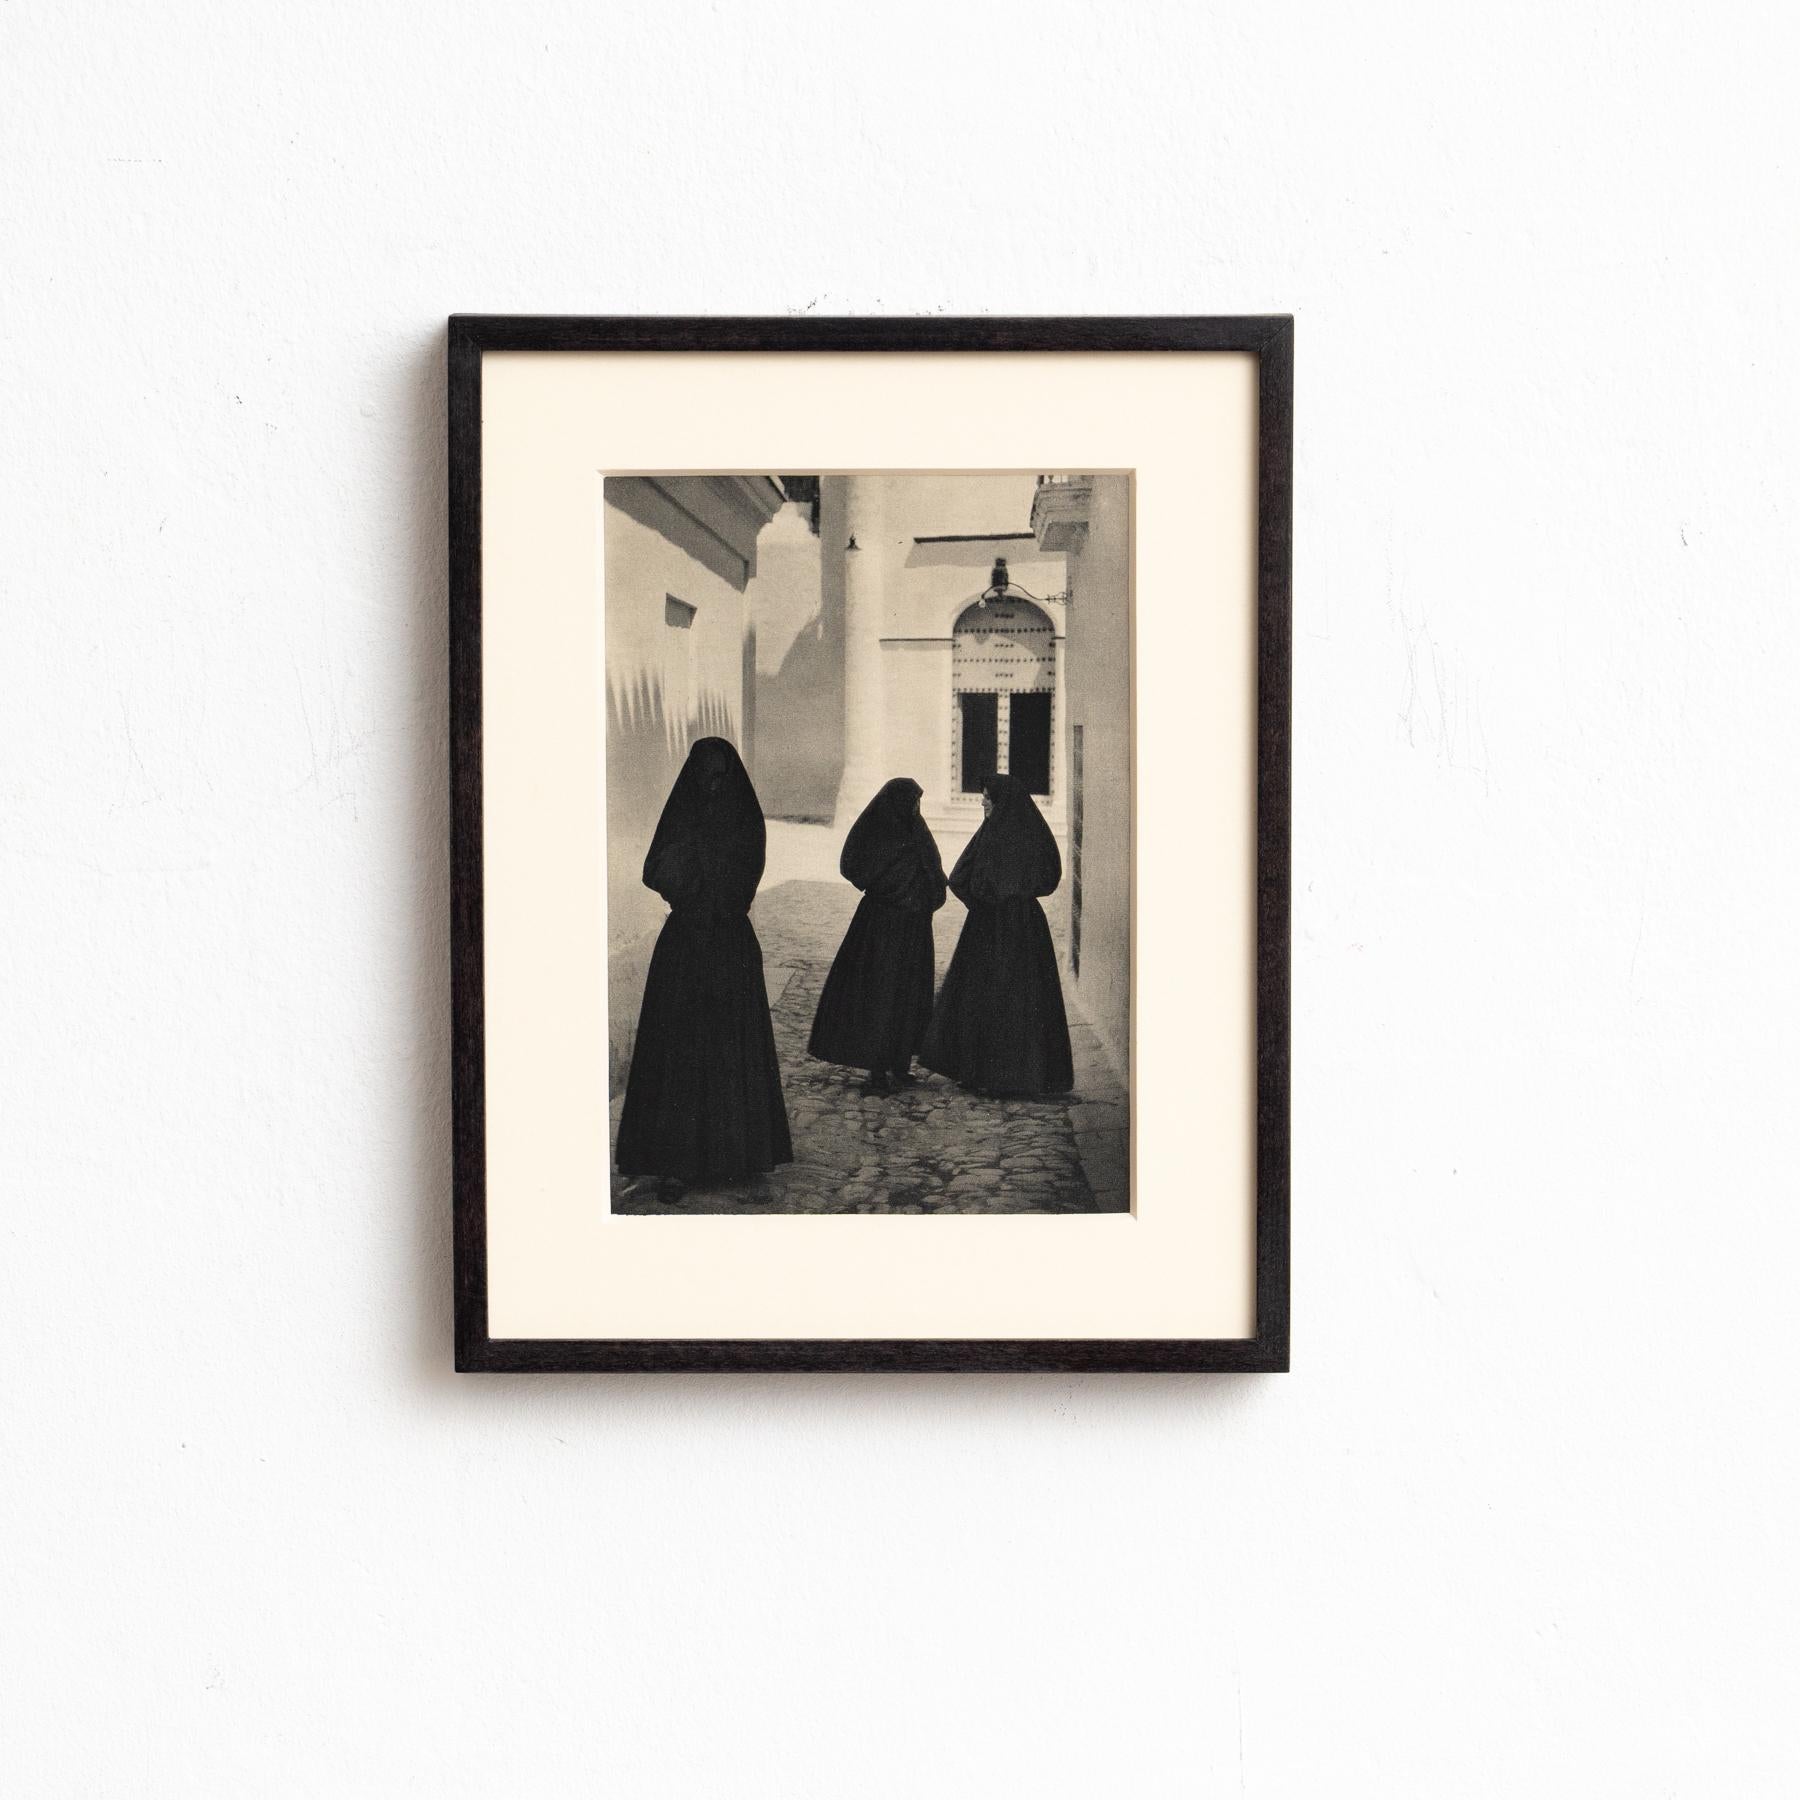 Jose Ortiz Echagüe's Vision: Spanish Heritage in Photogravure, circa 1930

From 1930
Photography by Jose Ortiz Echagüe
Photogravure
Framed in black lacquered wood
Dimensions: 31.5 cm (H) x 25 cm (W) x 3 cm (D)

Step into the mesmerizing world of